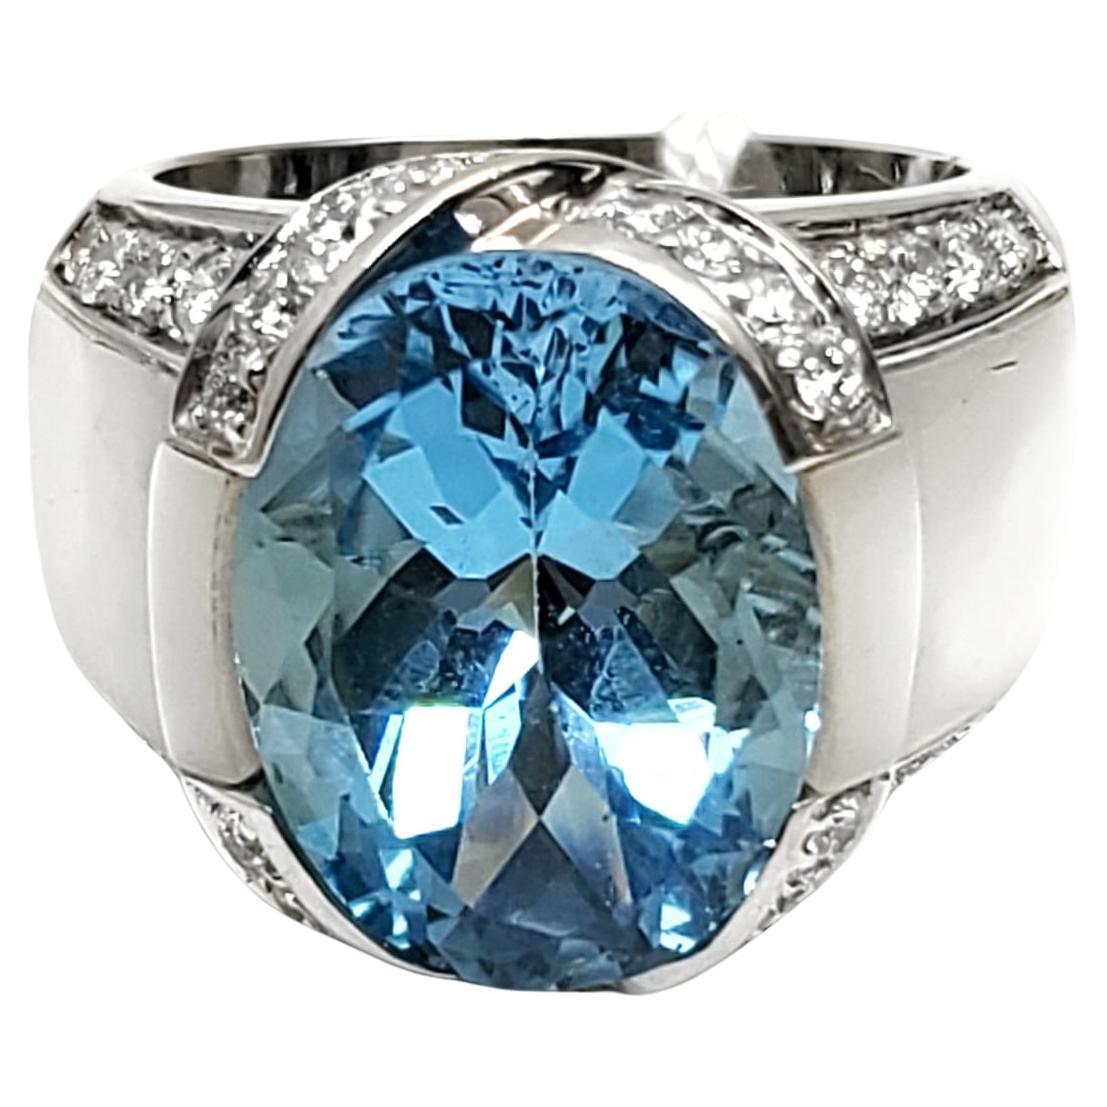 Andreoli Diamond Blue Topaz Mother of Pearl 18 Karat White Gold Ring (bague en or blanc 18 carats)